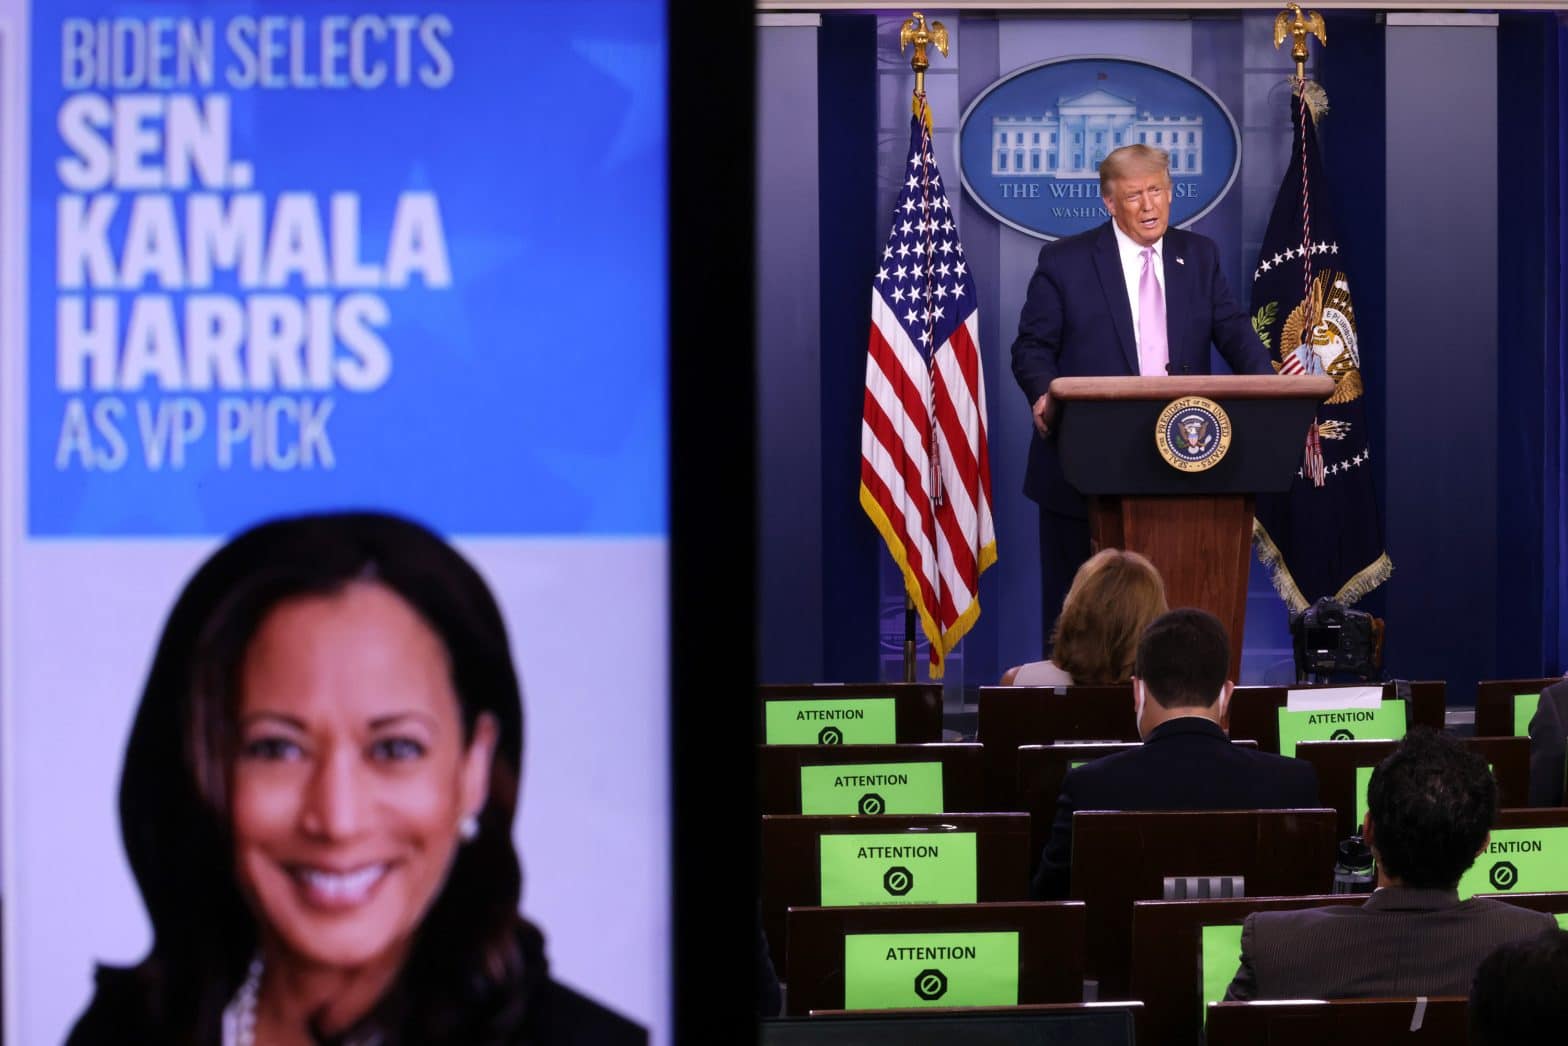 ‘Extraordinarily Nasty’: Trump and His Campaign Launch Swift Attack on Kamala Harris